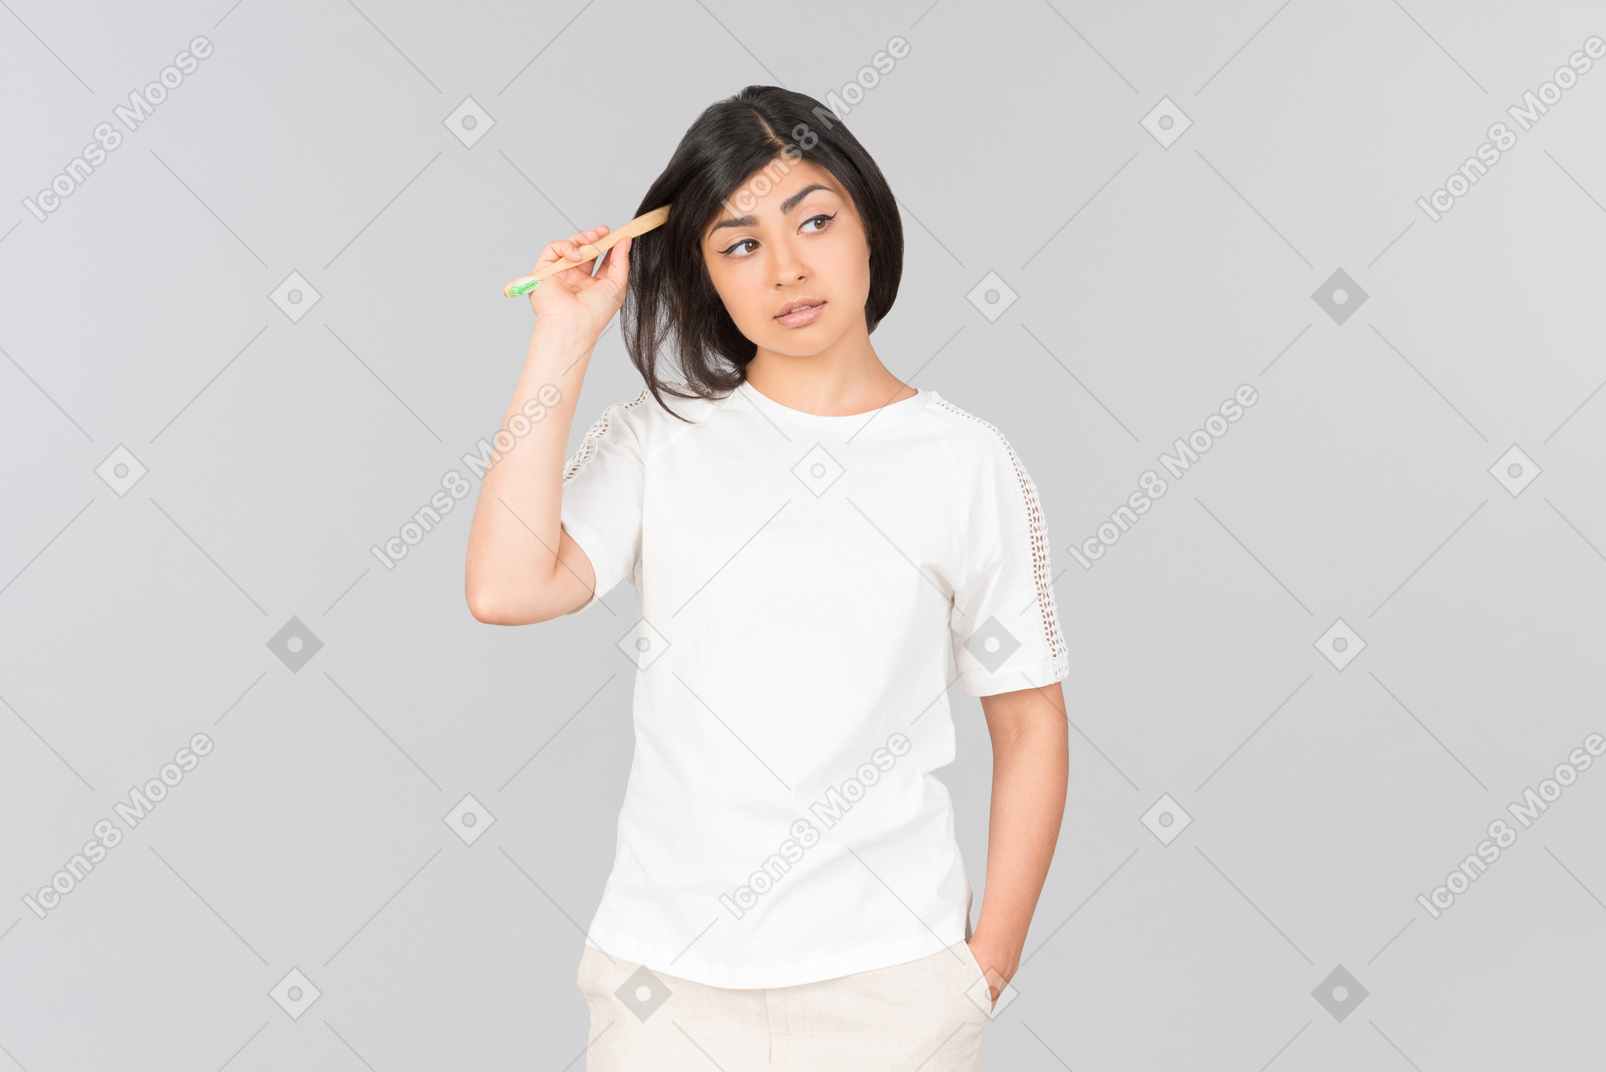 Pensive young indian woman touching hair with a toothbrush